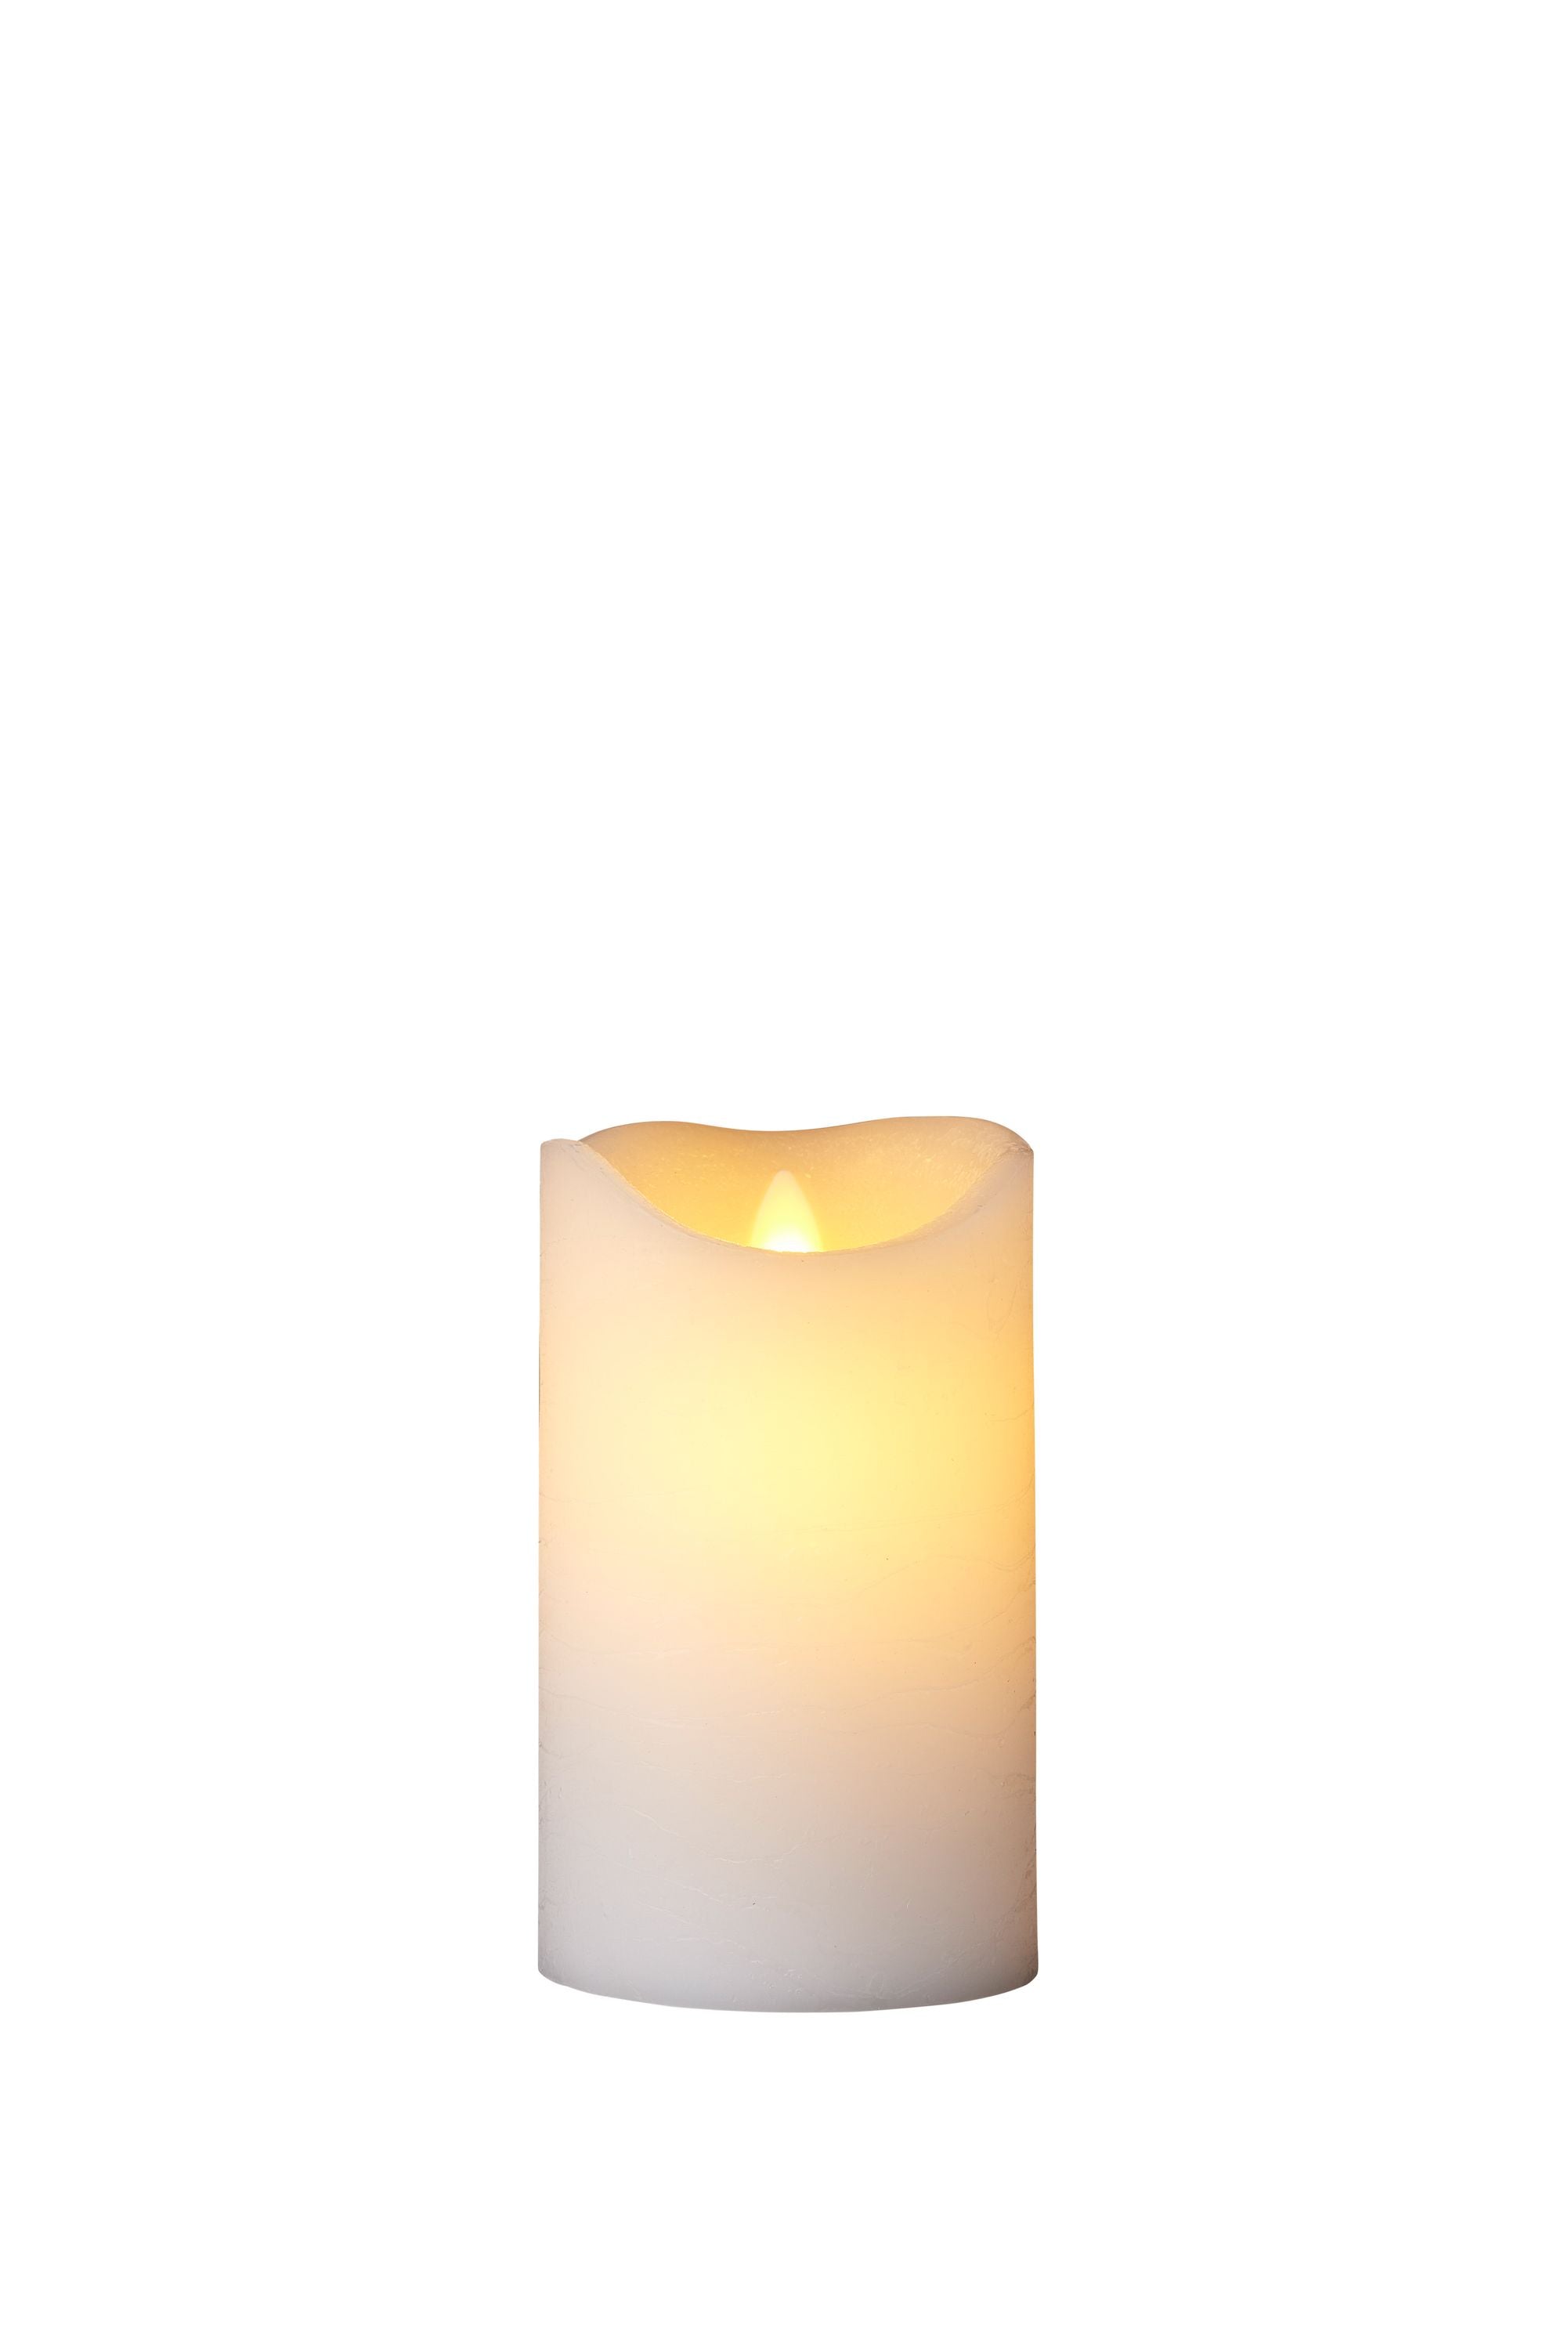 Sirius Sara Rechargeable Led Candle White, ø7,5x H12,5cm